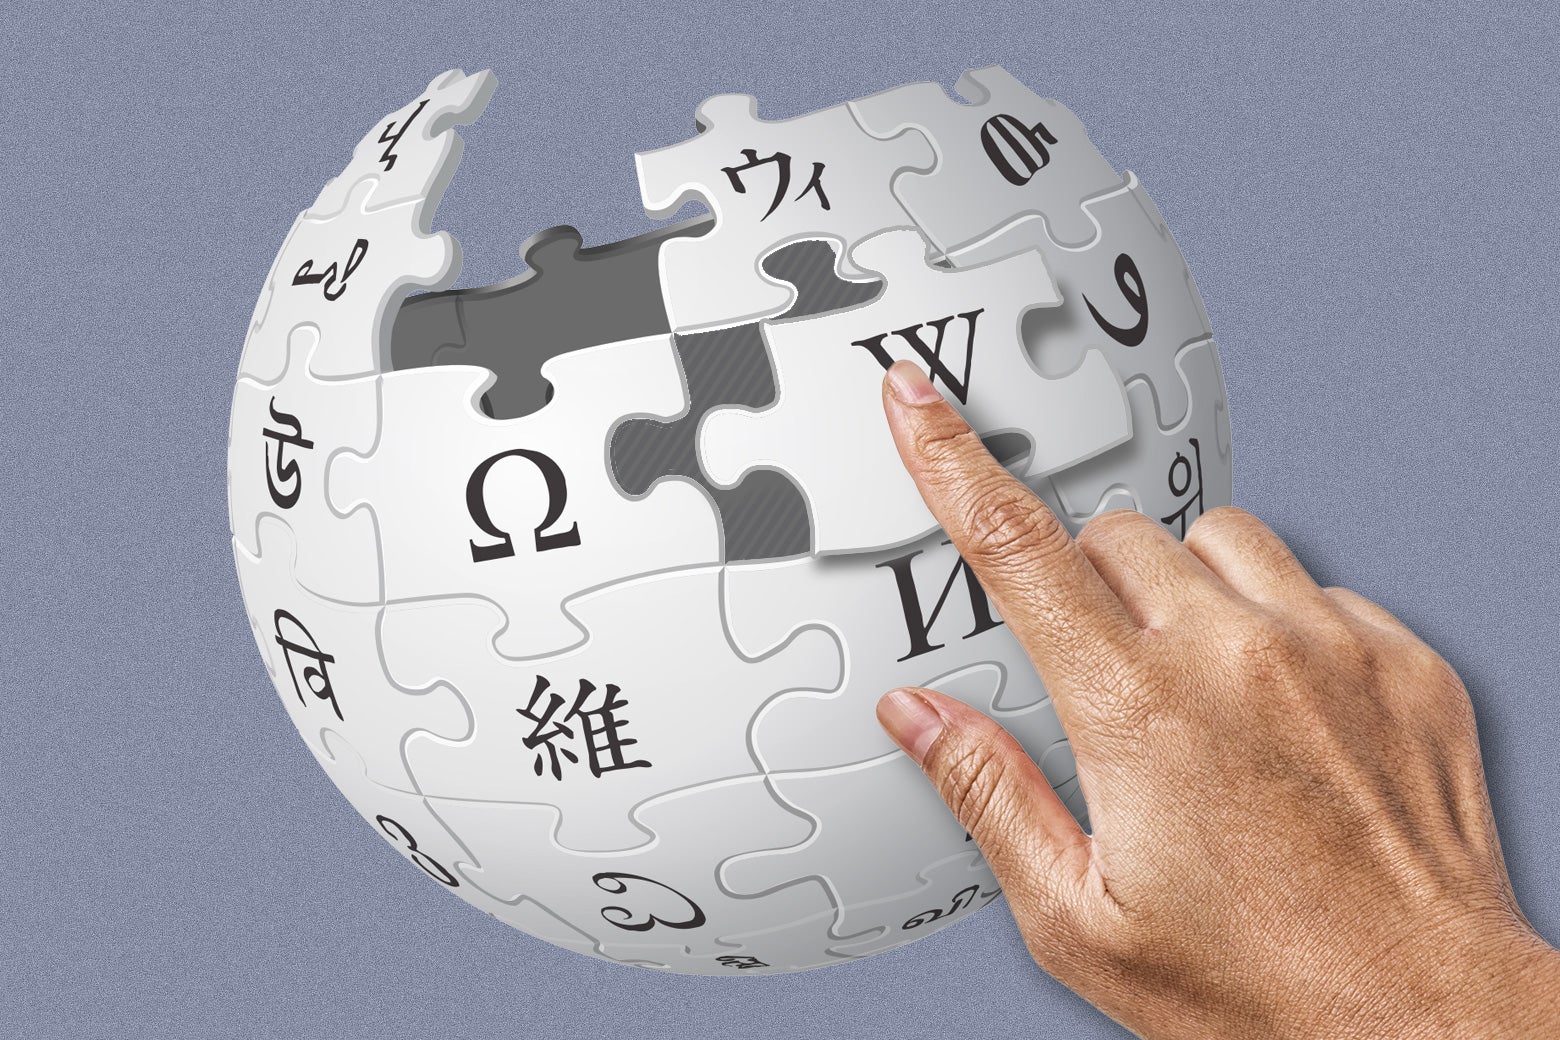 Wikipedia Has Spent Years on a Barely Noticeable Redesign